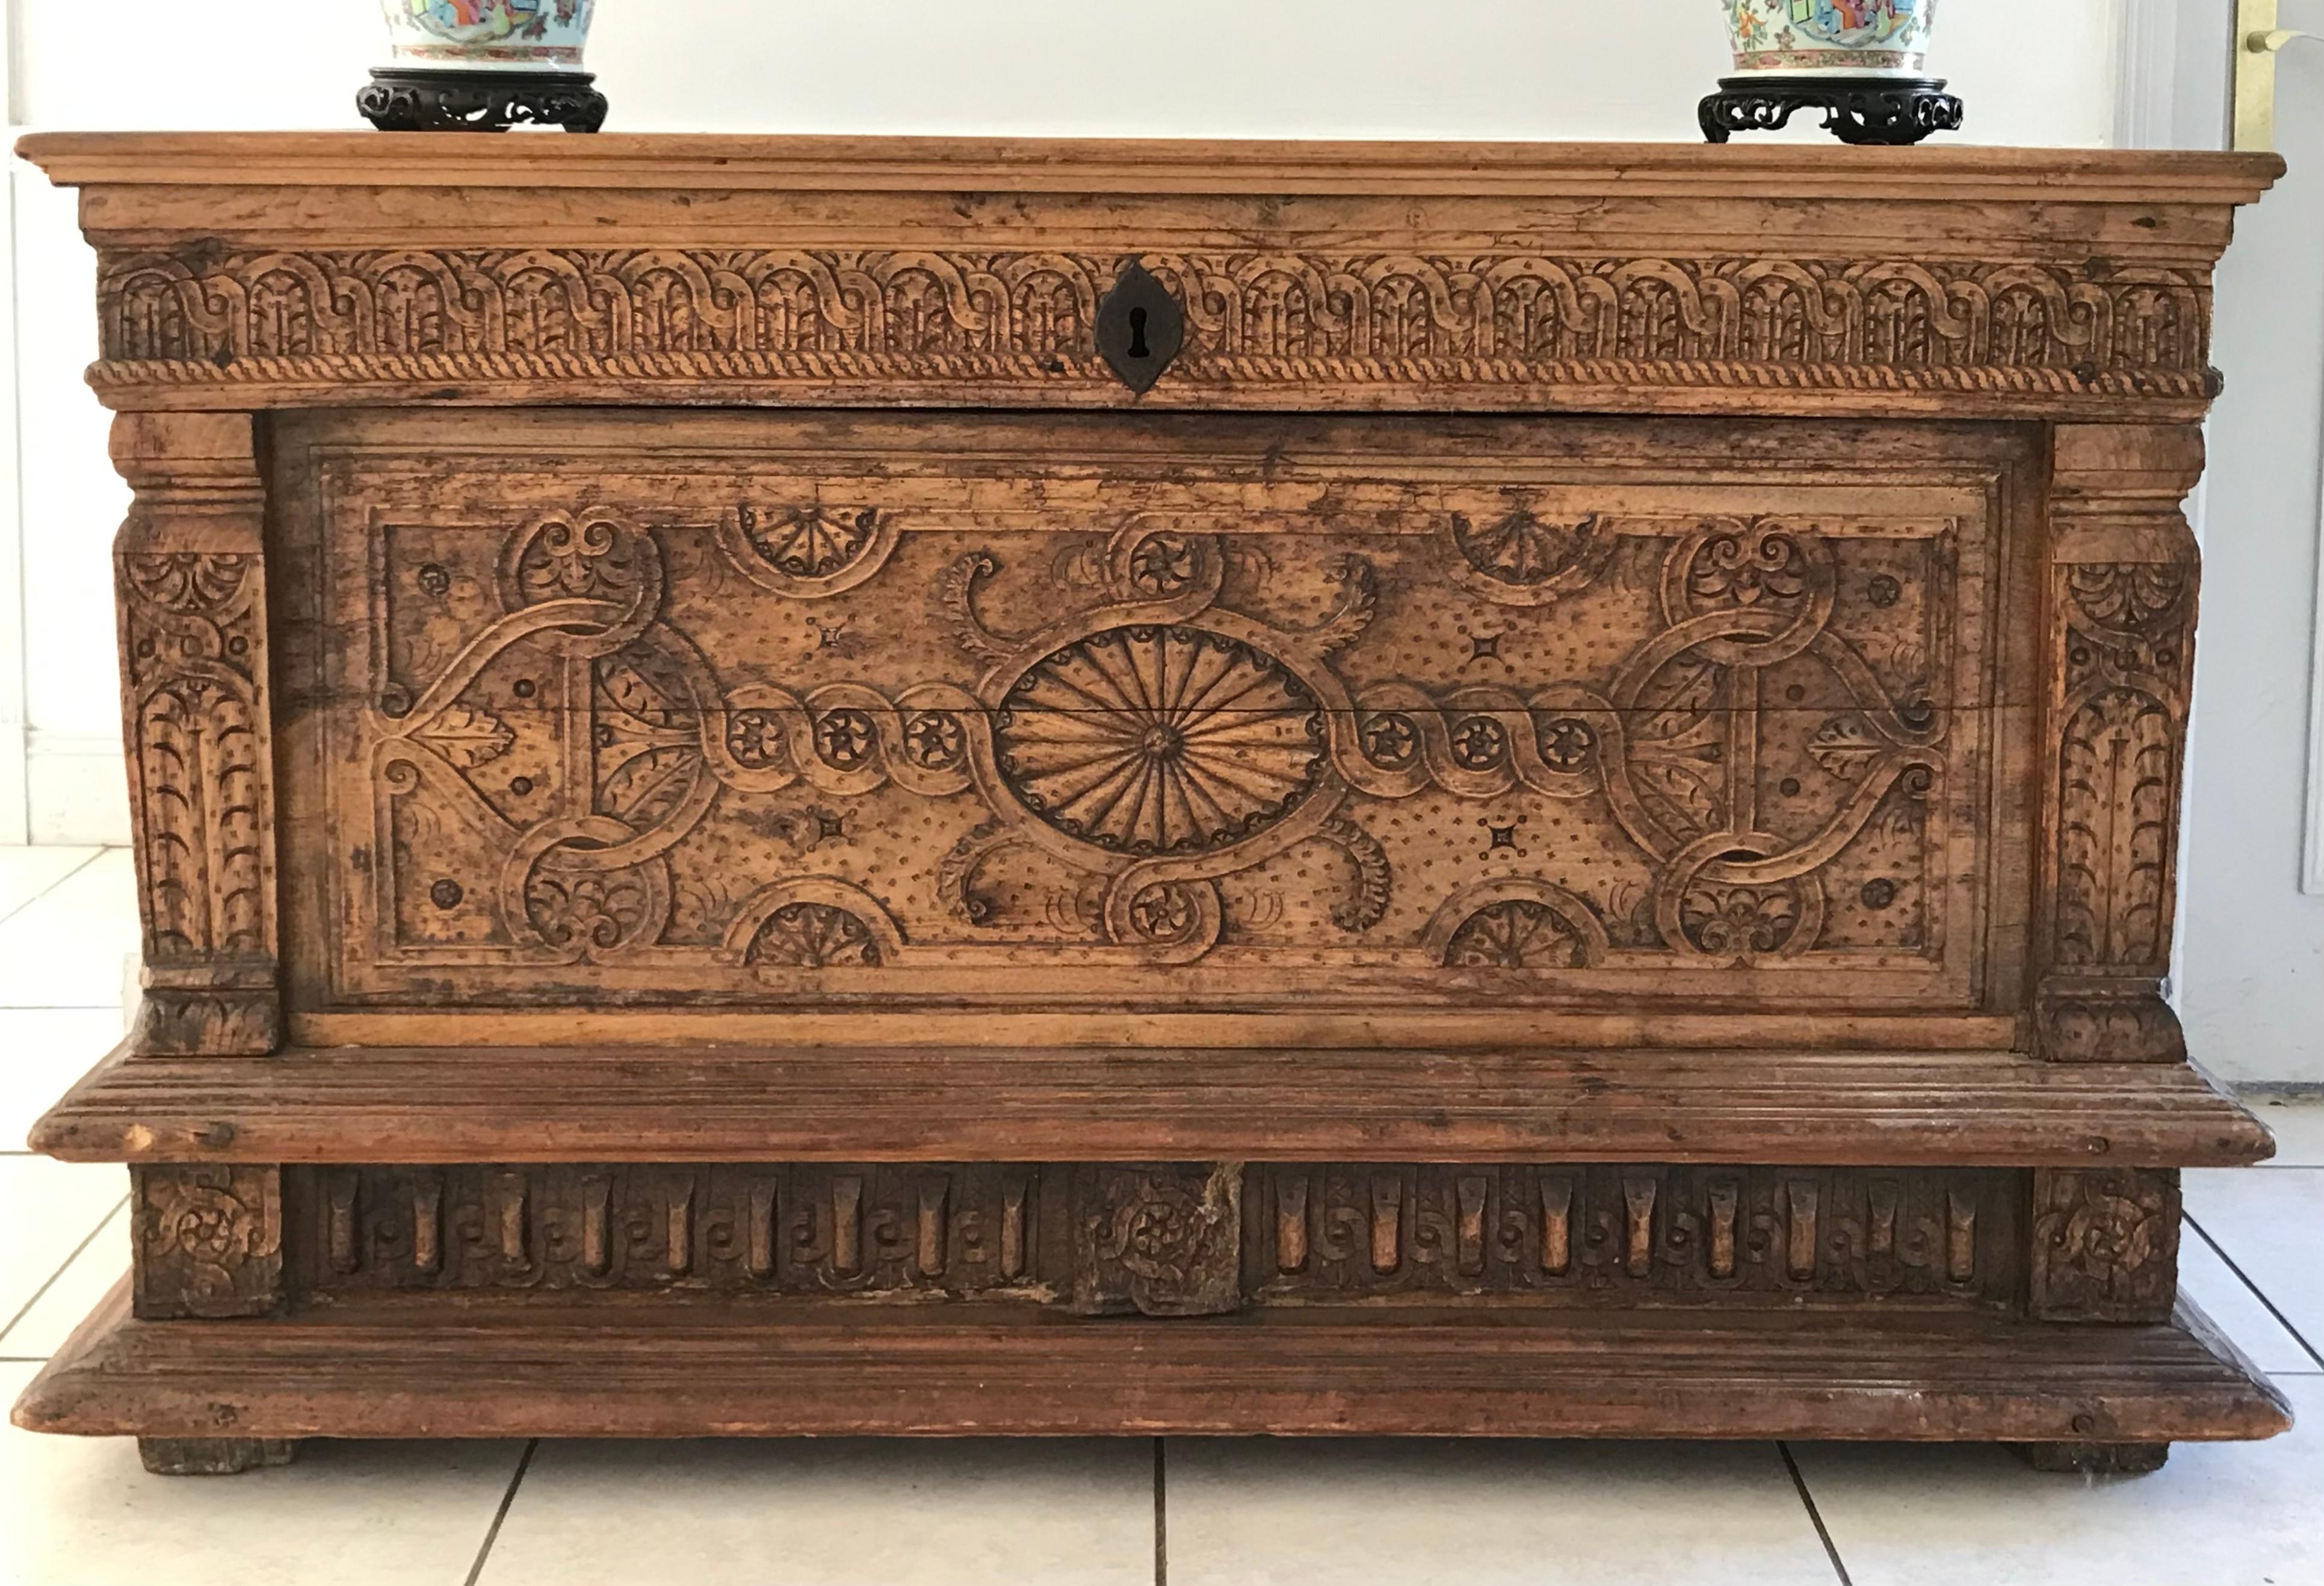 Nice carved wooden chest from the Renaissance period, late 16th early 17th century.
 The lower part is decorated with a carved frieze composed of geometric patterns, a floral pattern is present in the center as well as at the ends. The central part